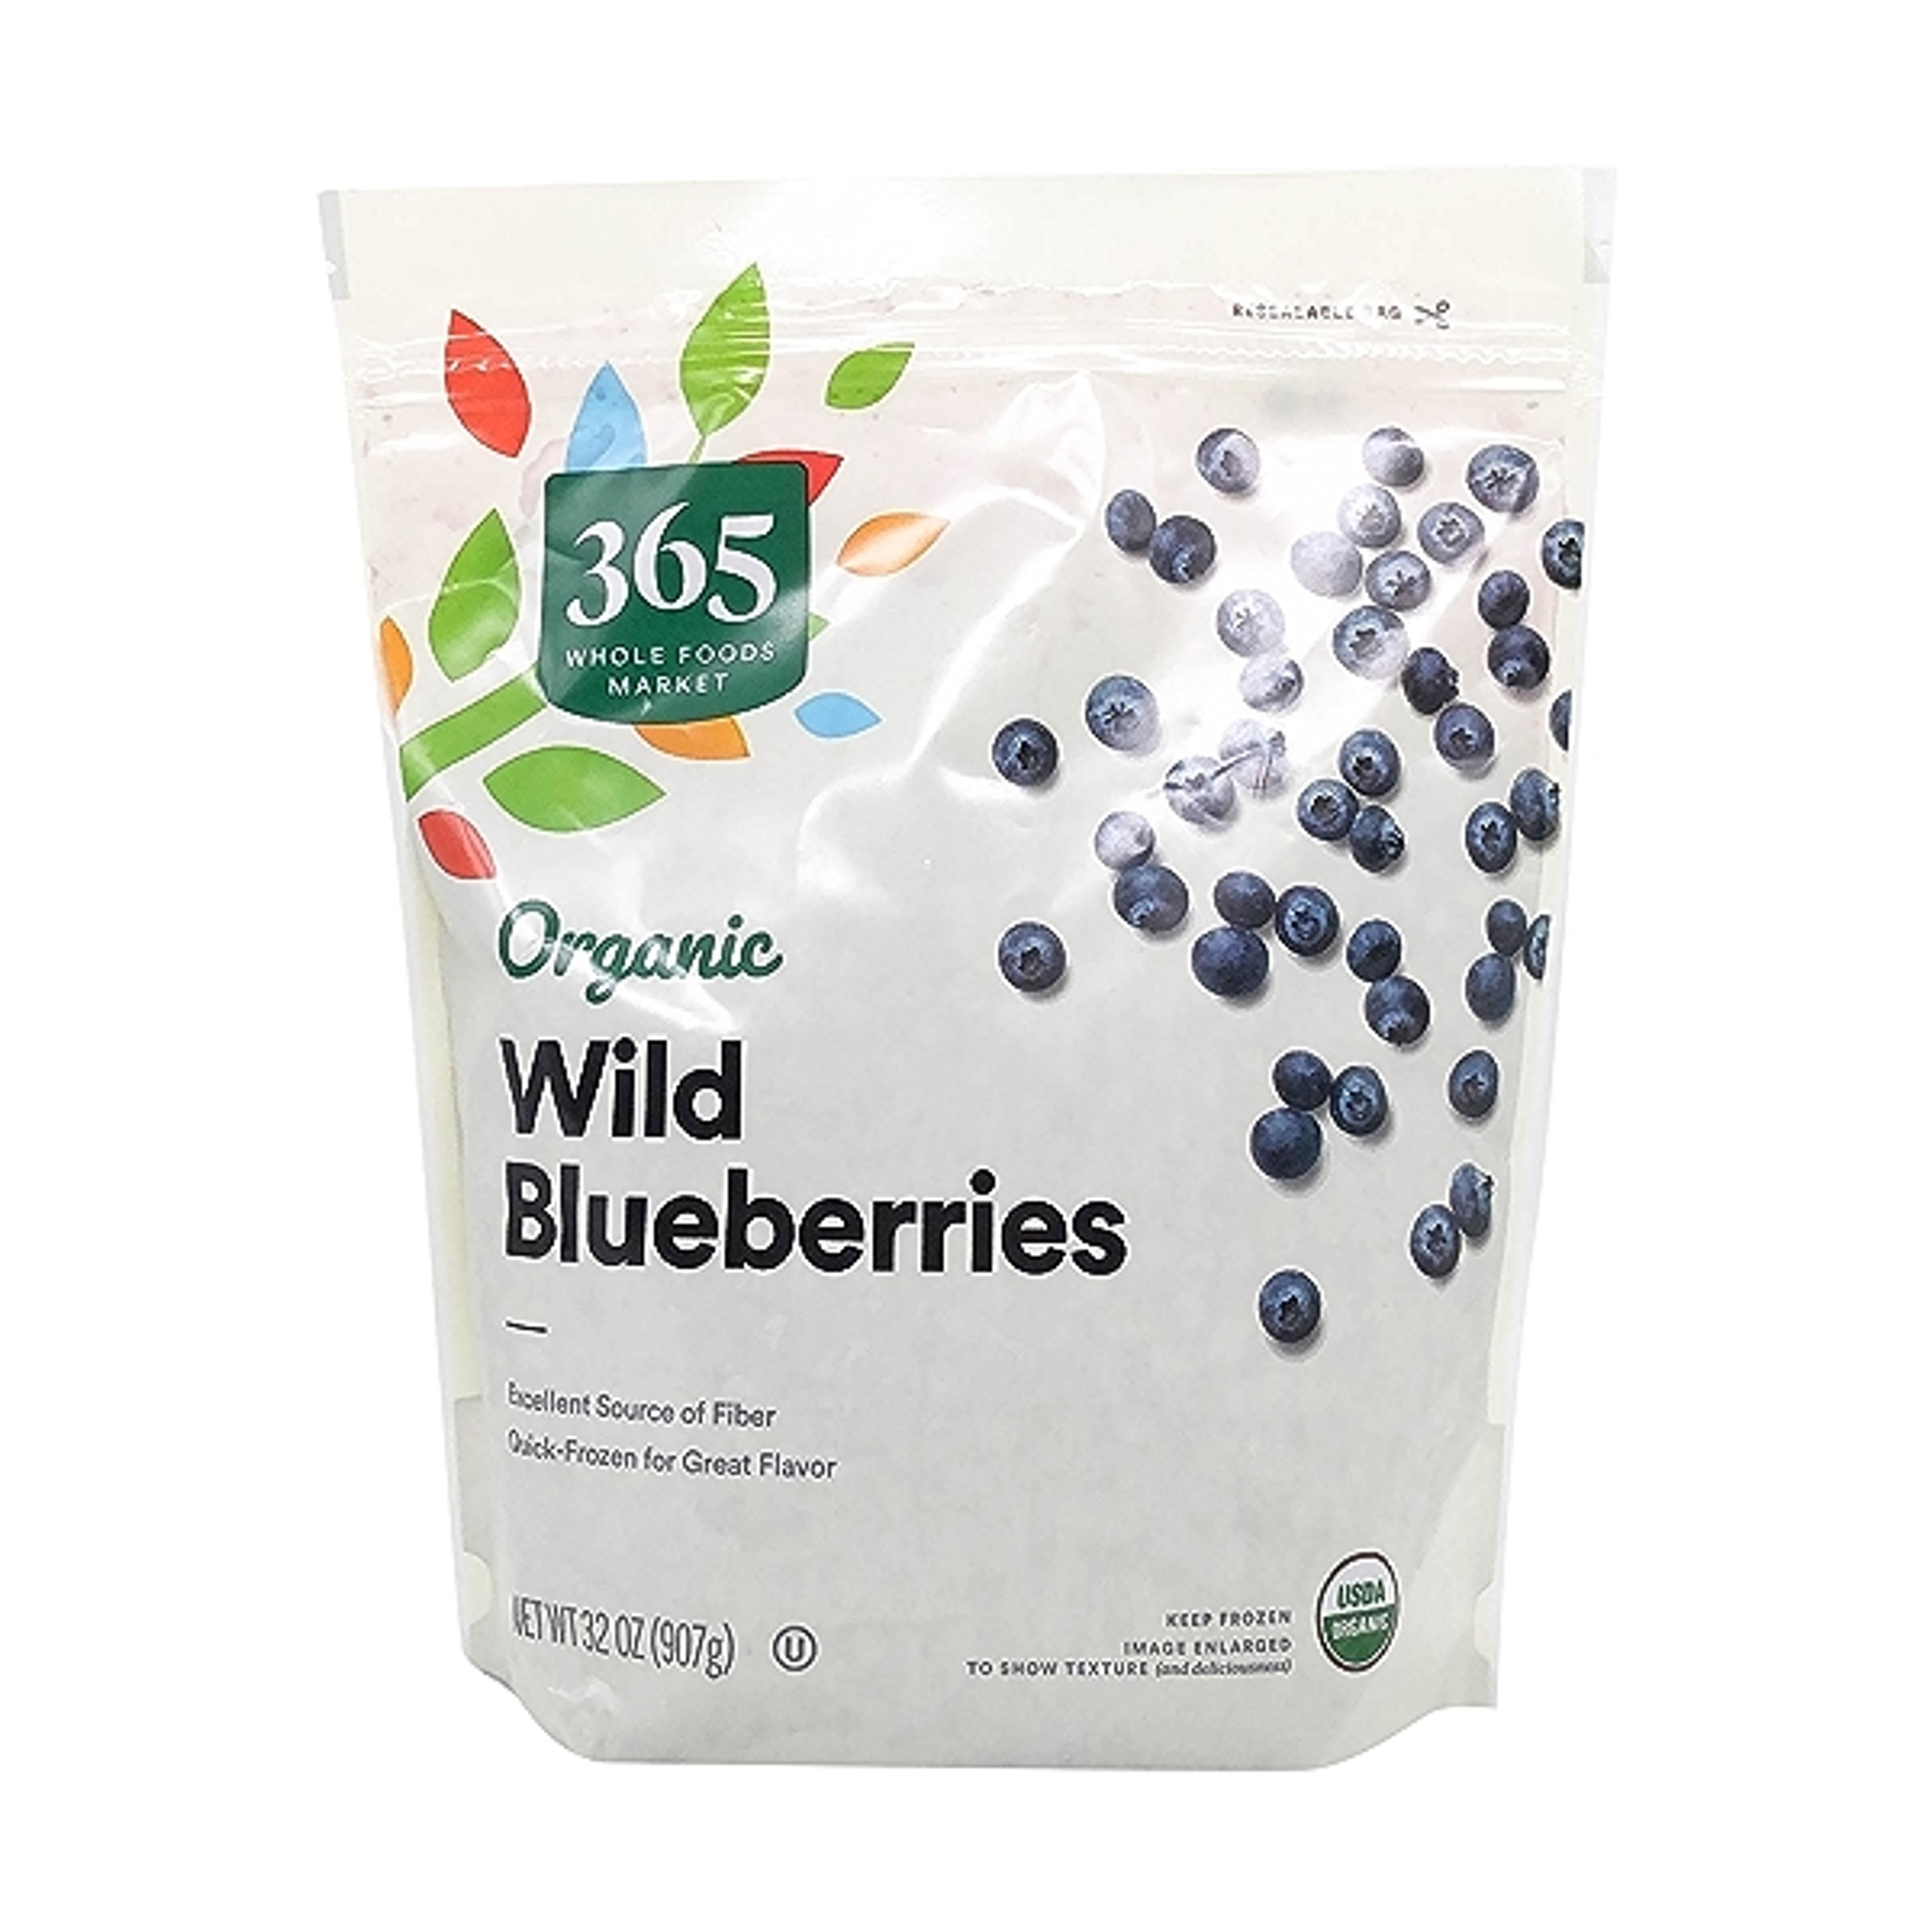 Organic Wild Blueberries, 32 oz at Whole Foods Market